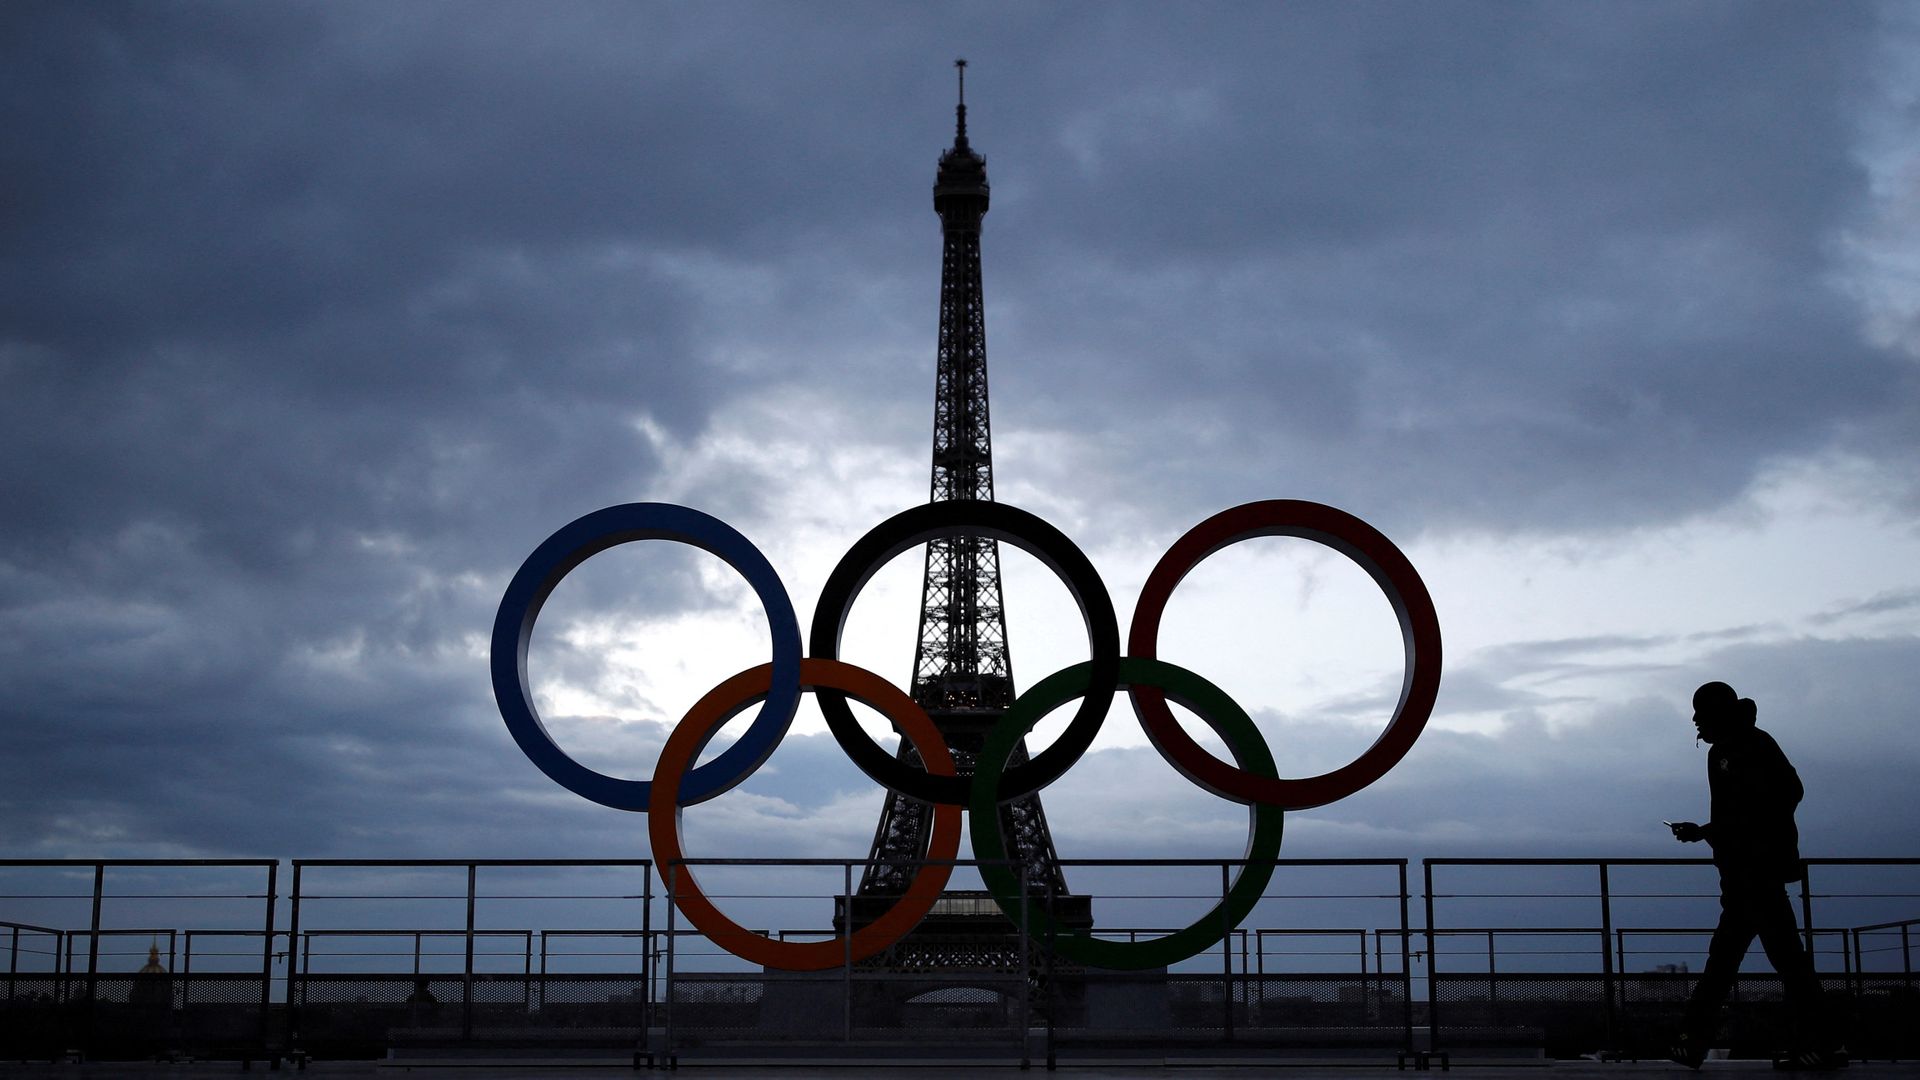 16-year-old arrested after saying he wanted to 'die a martyr' at Paris Olympics